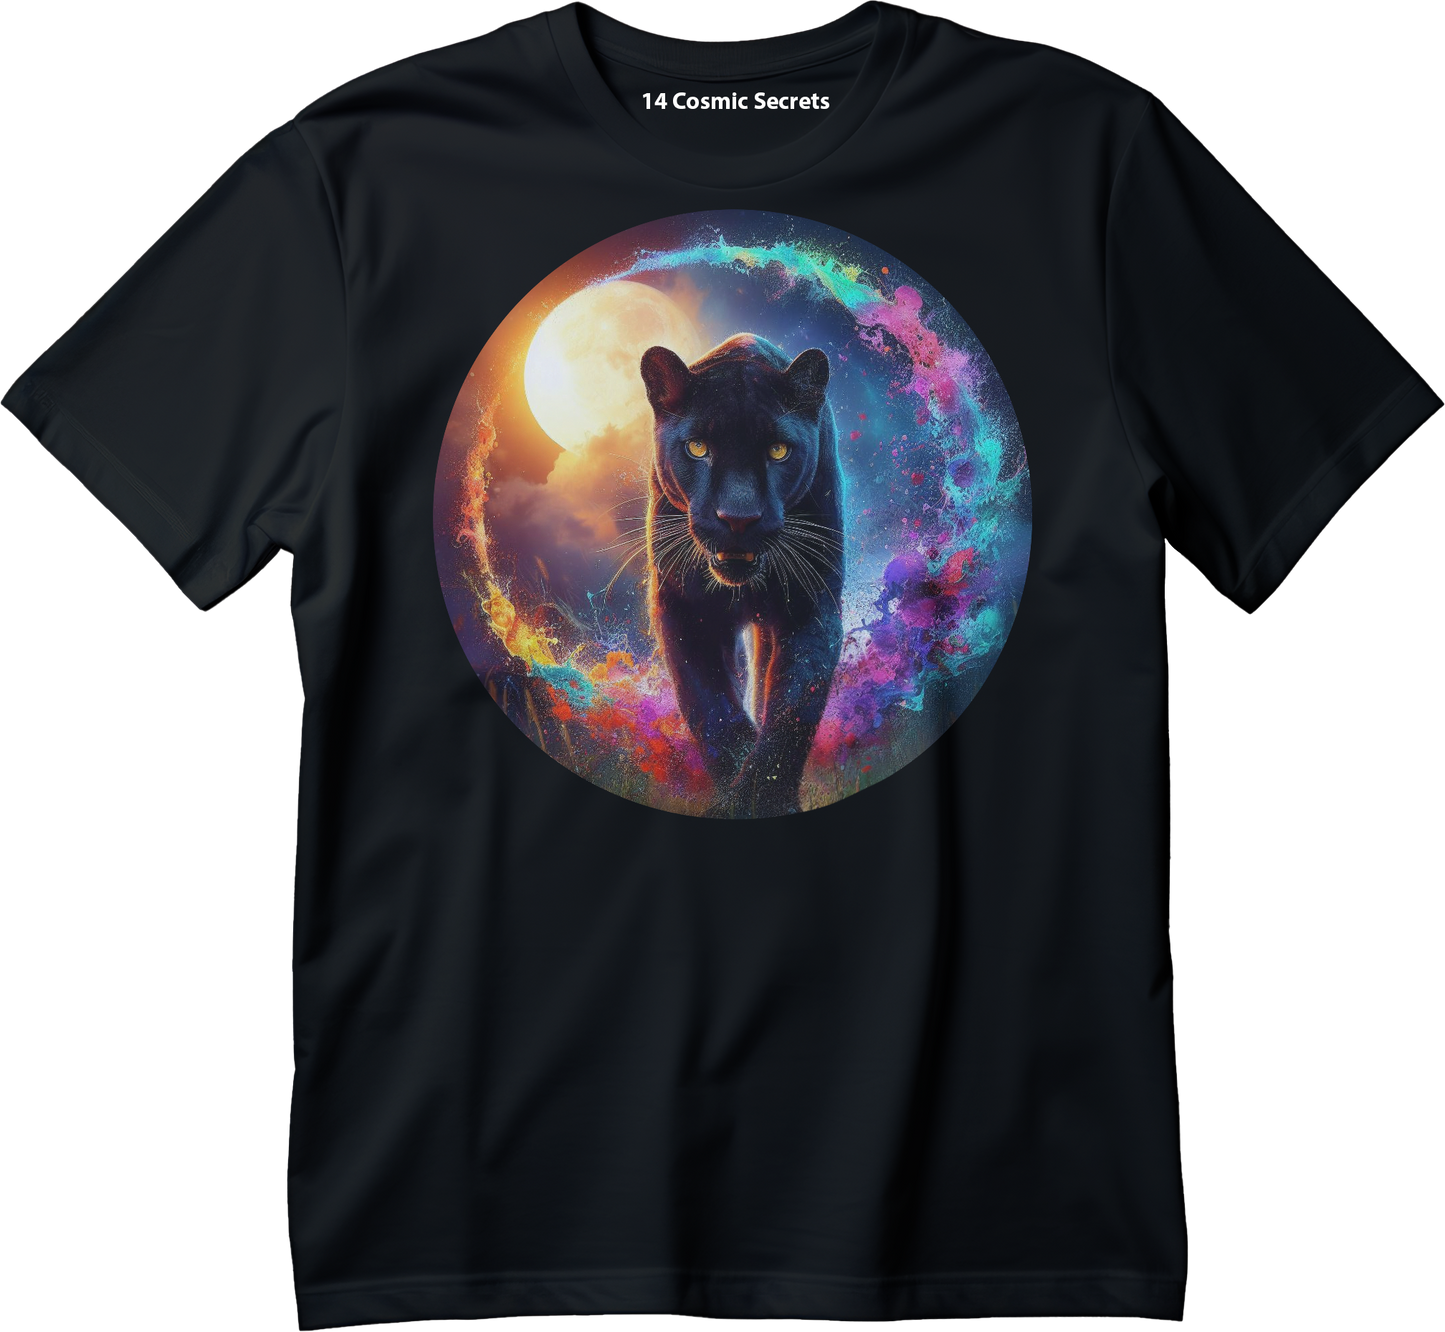 The Bold Black Panther  Graphic Printed T-Shirt  Cotton T-Shirt Magnificence of India T-Shirt